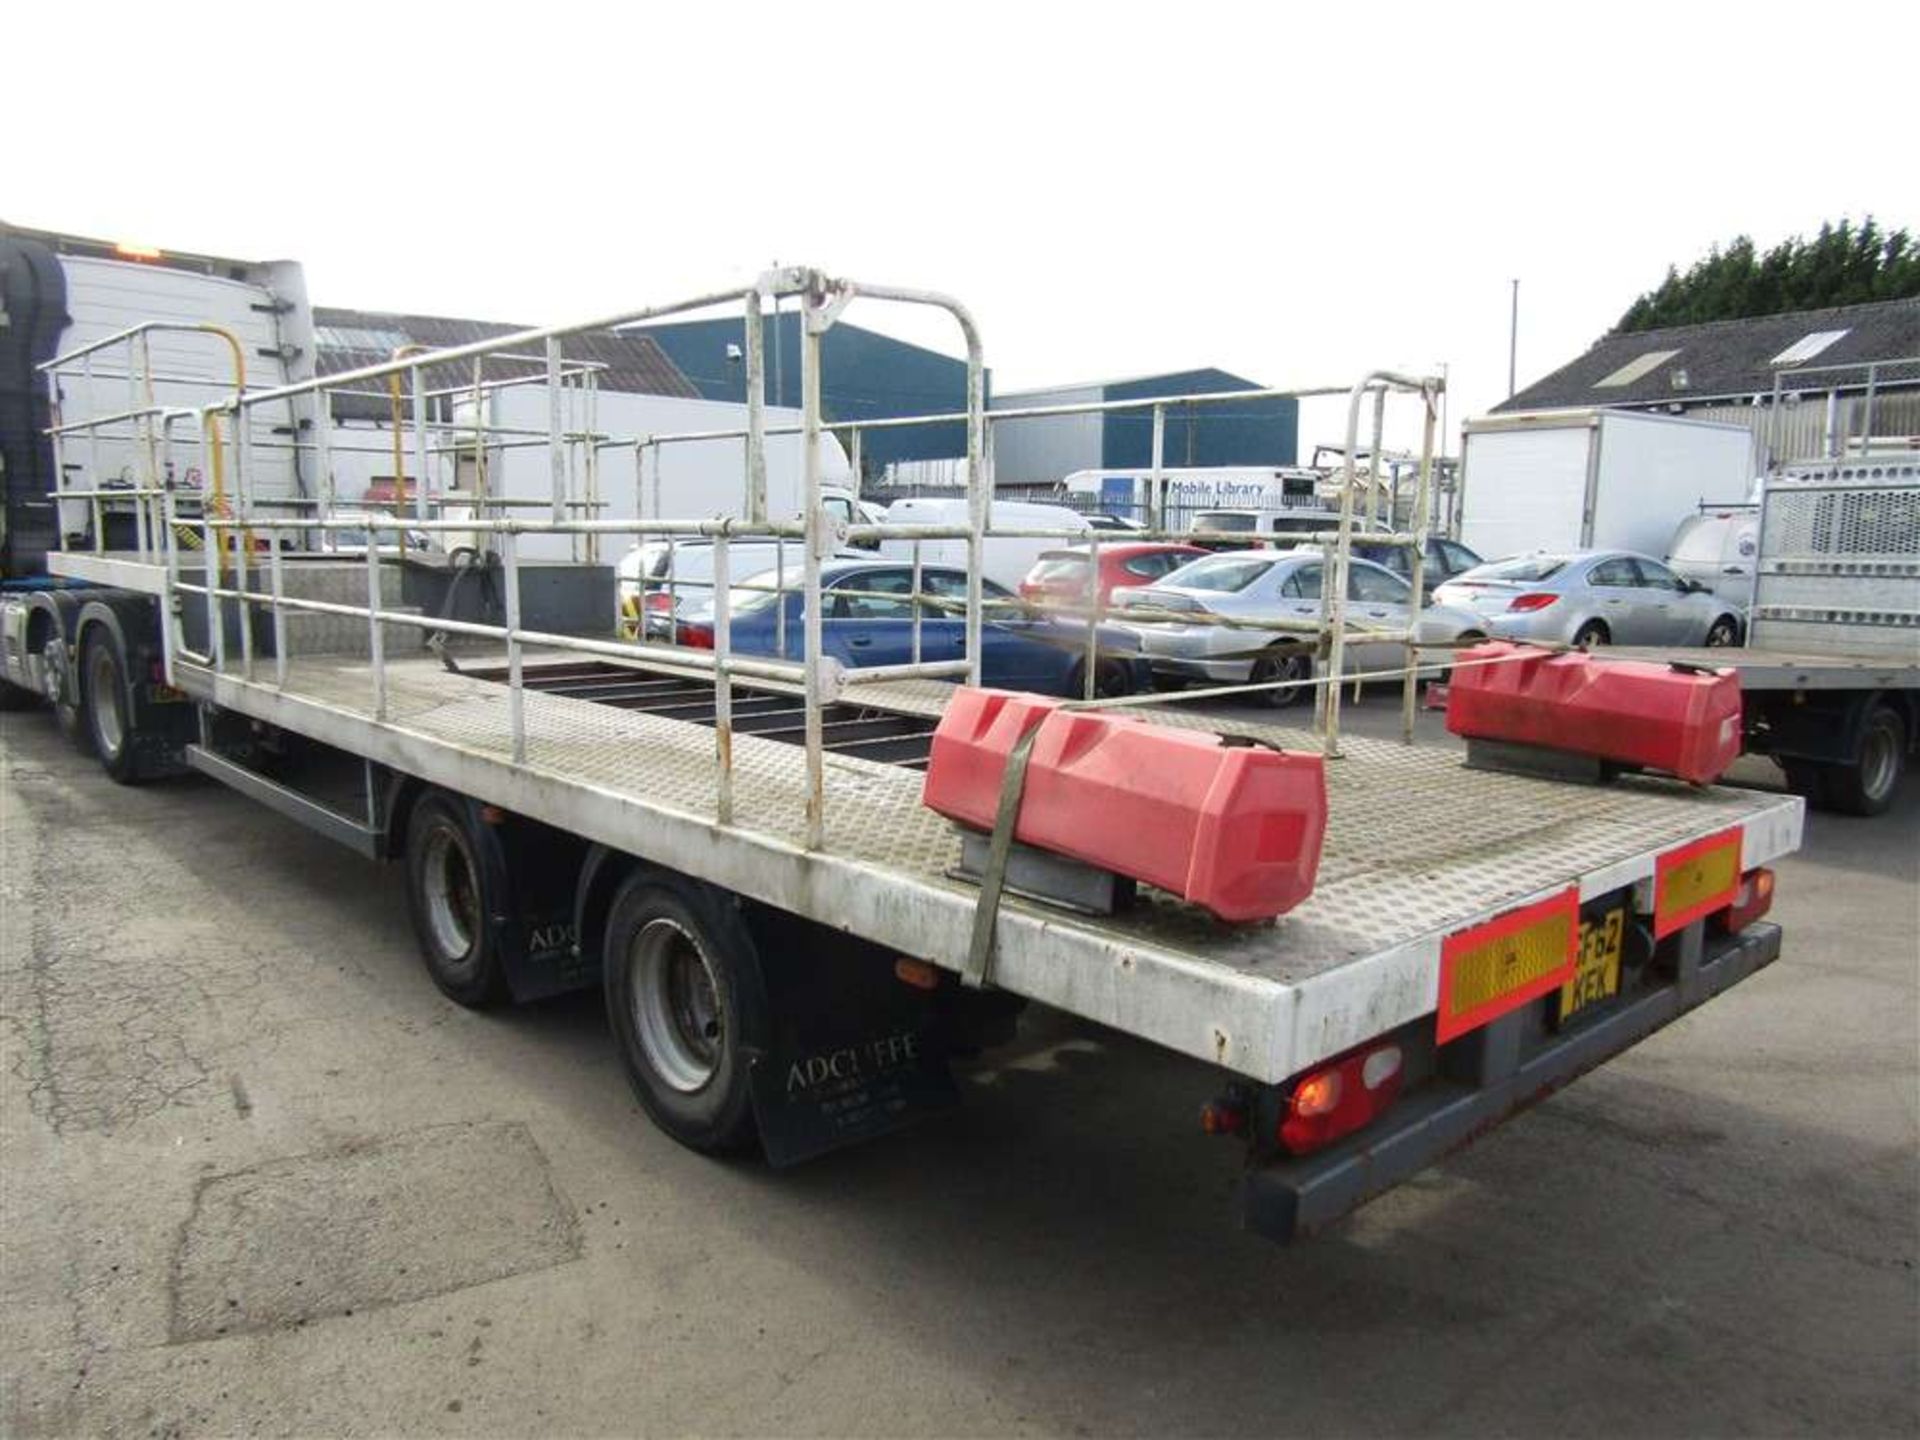 2010 Adcliffe Step Frame Trailer (Direct United Utilities Water) - Image 3 of 5